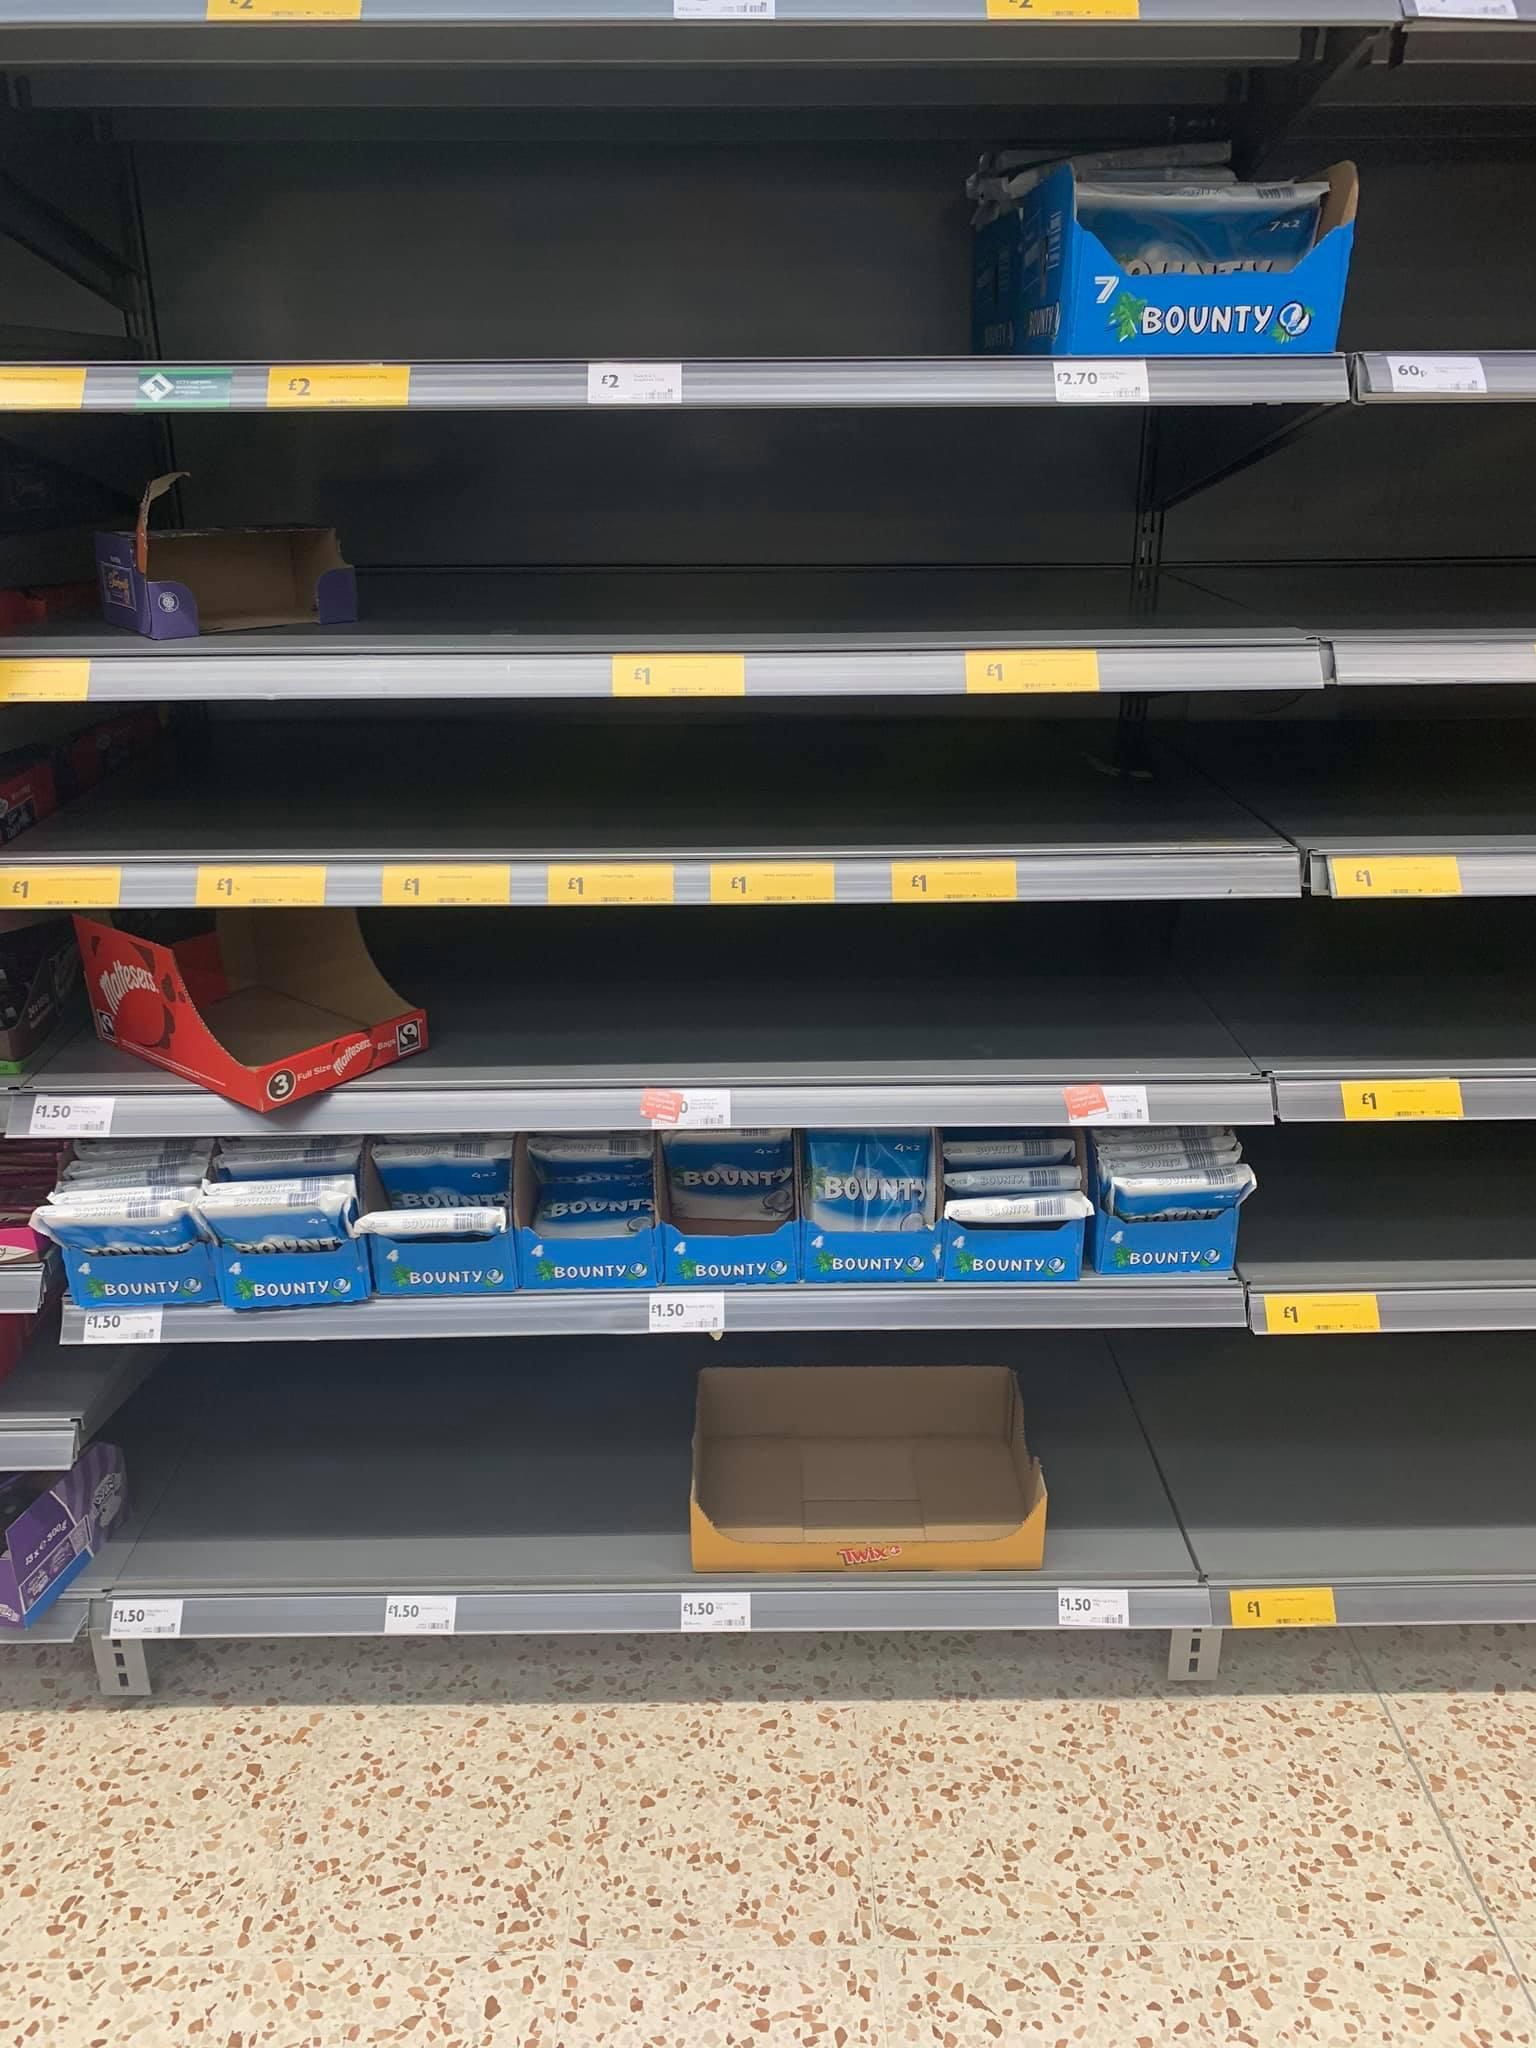 throwback to the first UK lockdown in 2020. despite the shelves being wiped clean, no body wanted to touch a bounty.